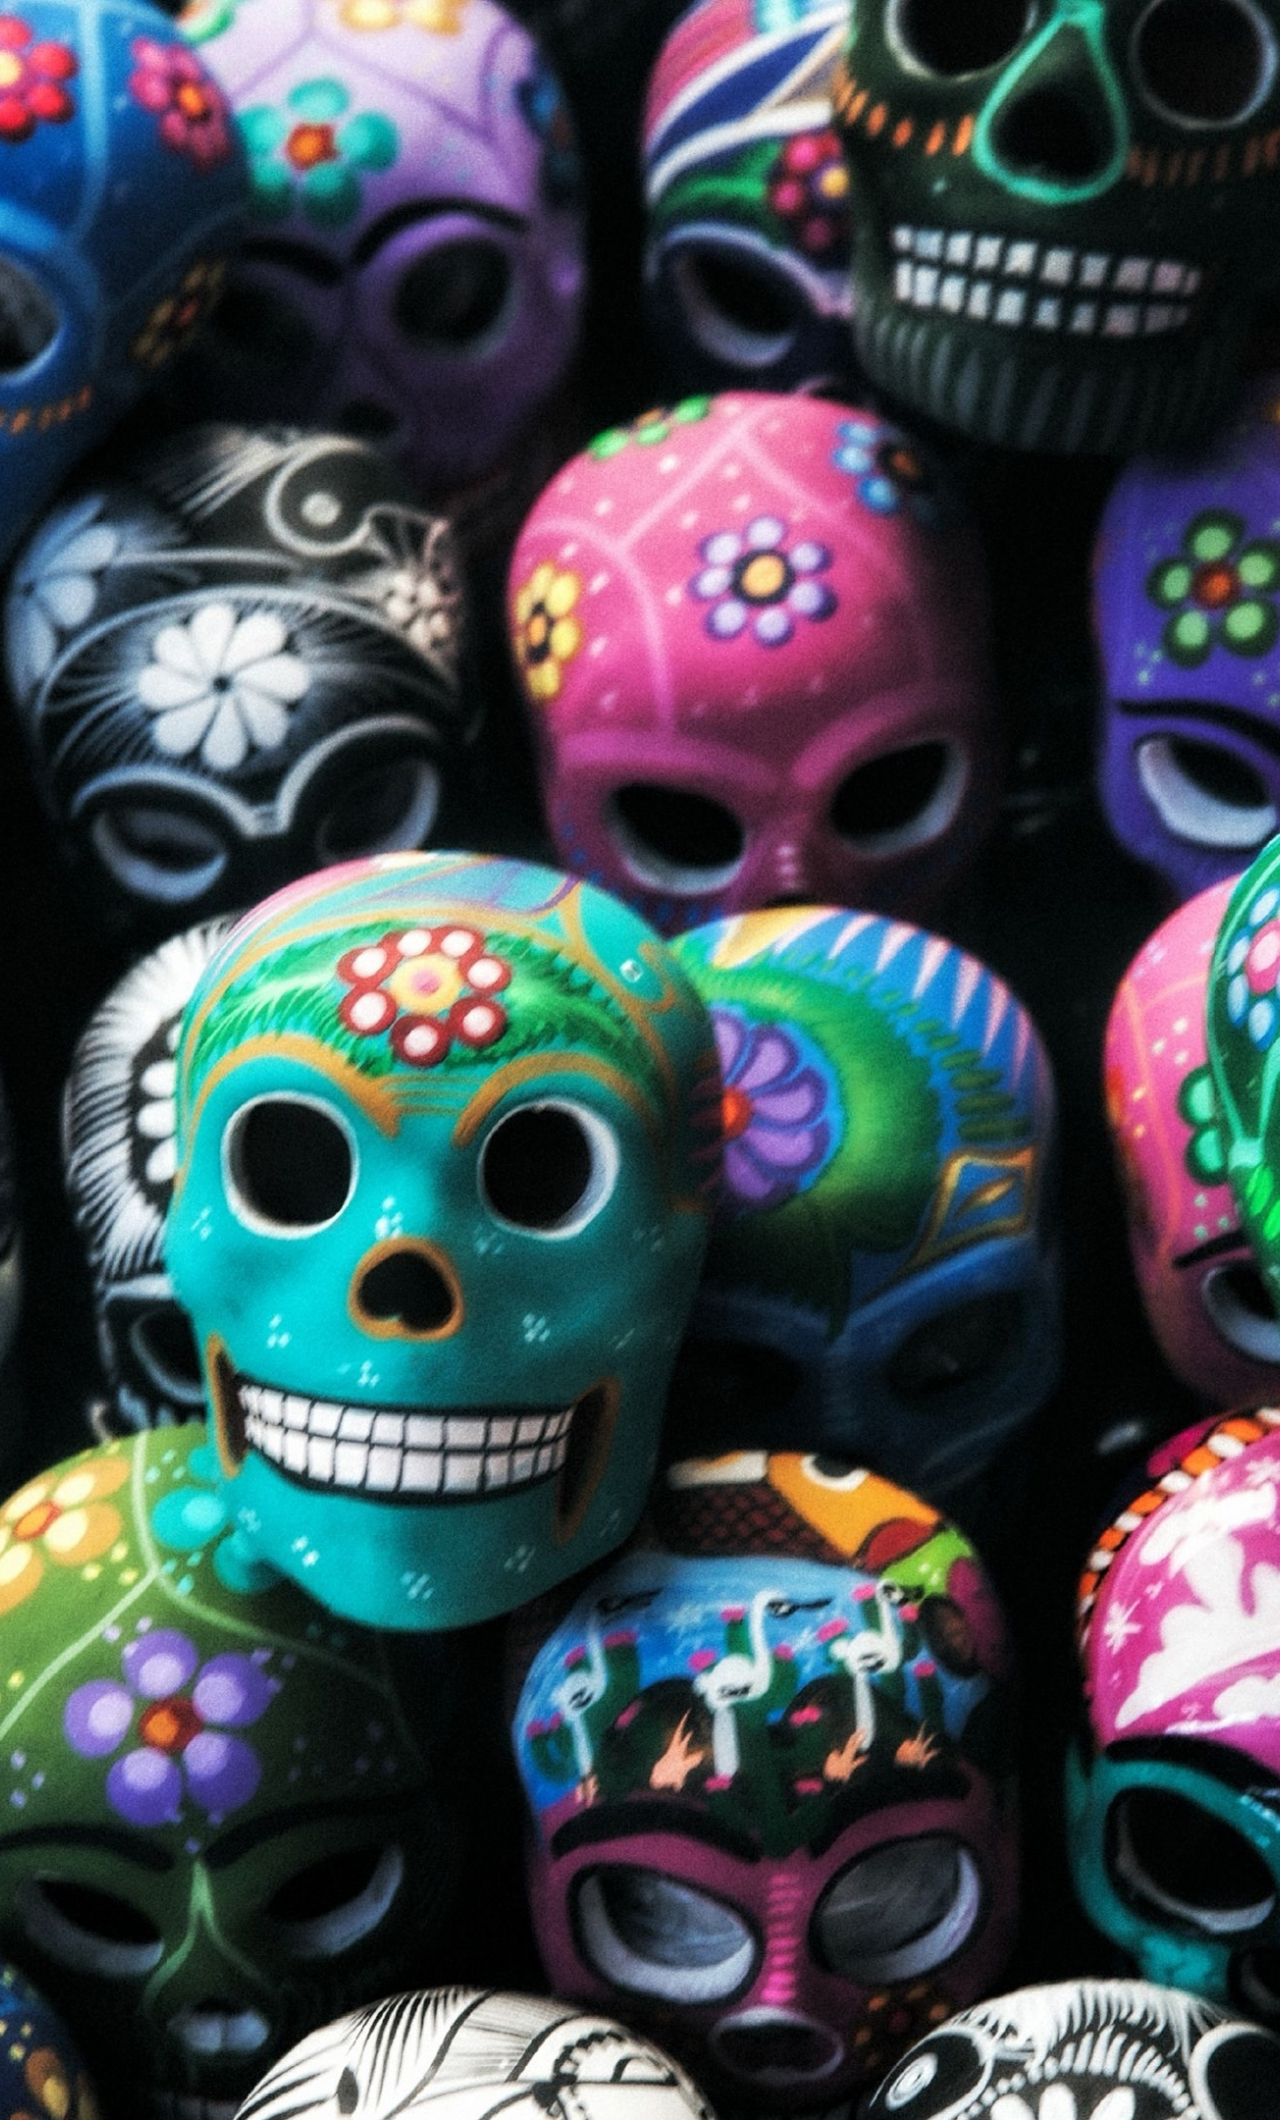 Download 1280x2120 wallpaper mexican art, colorful skulls, iphone 6 plus, 1280x2120 HD image, background, 25978